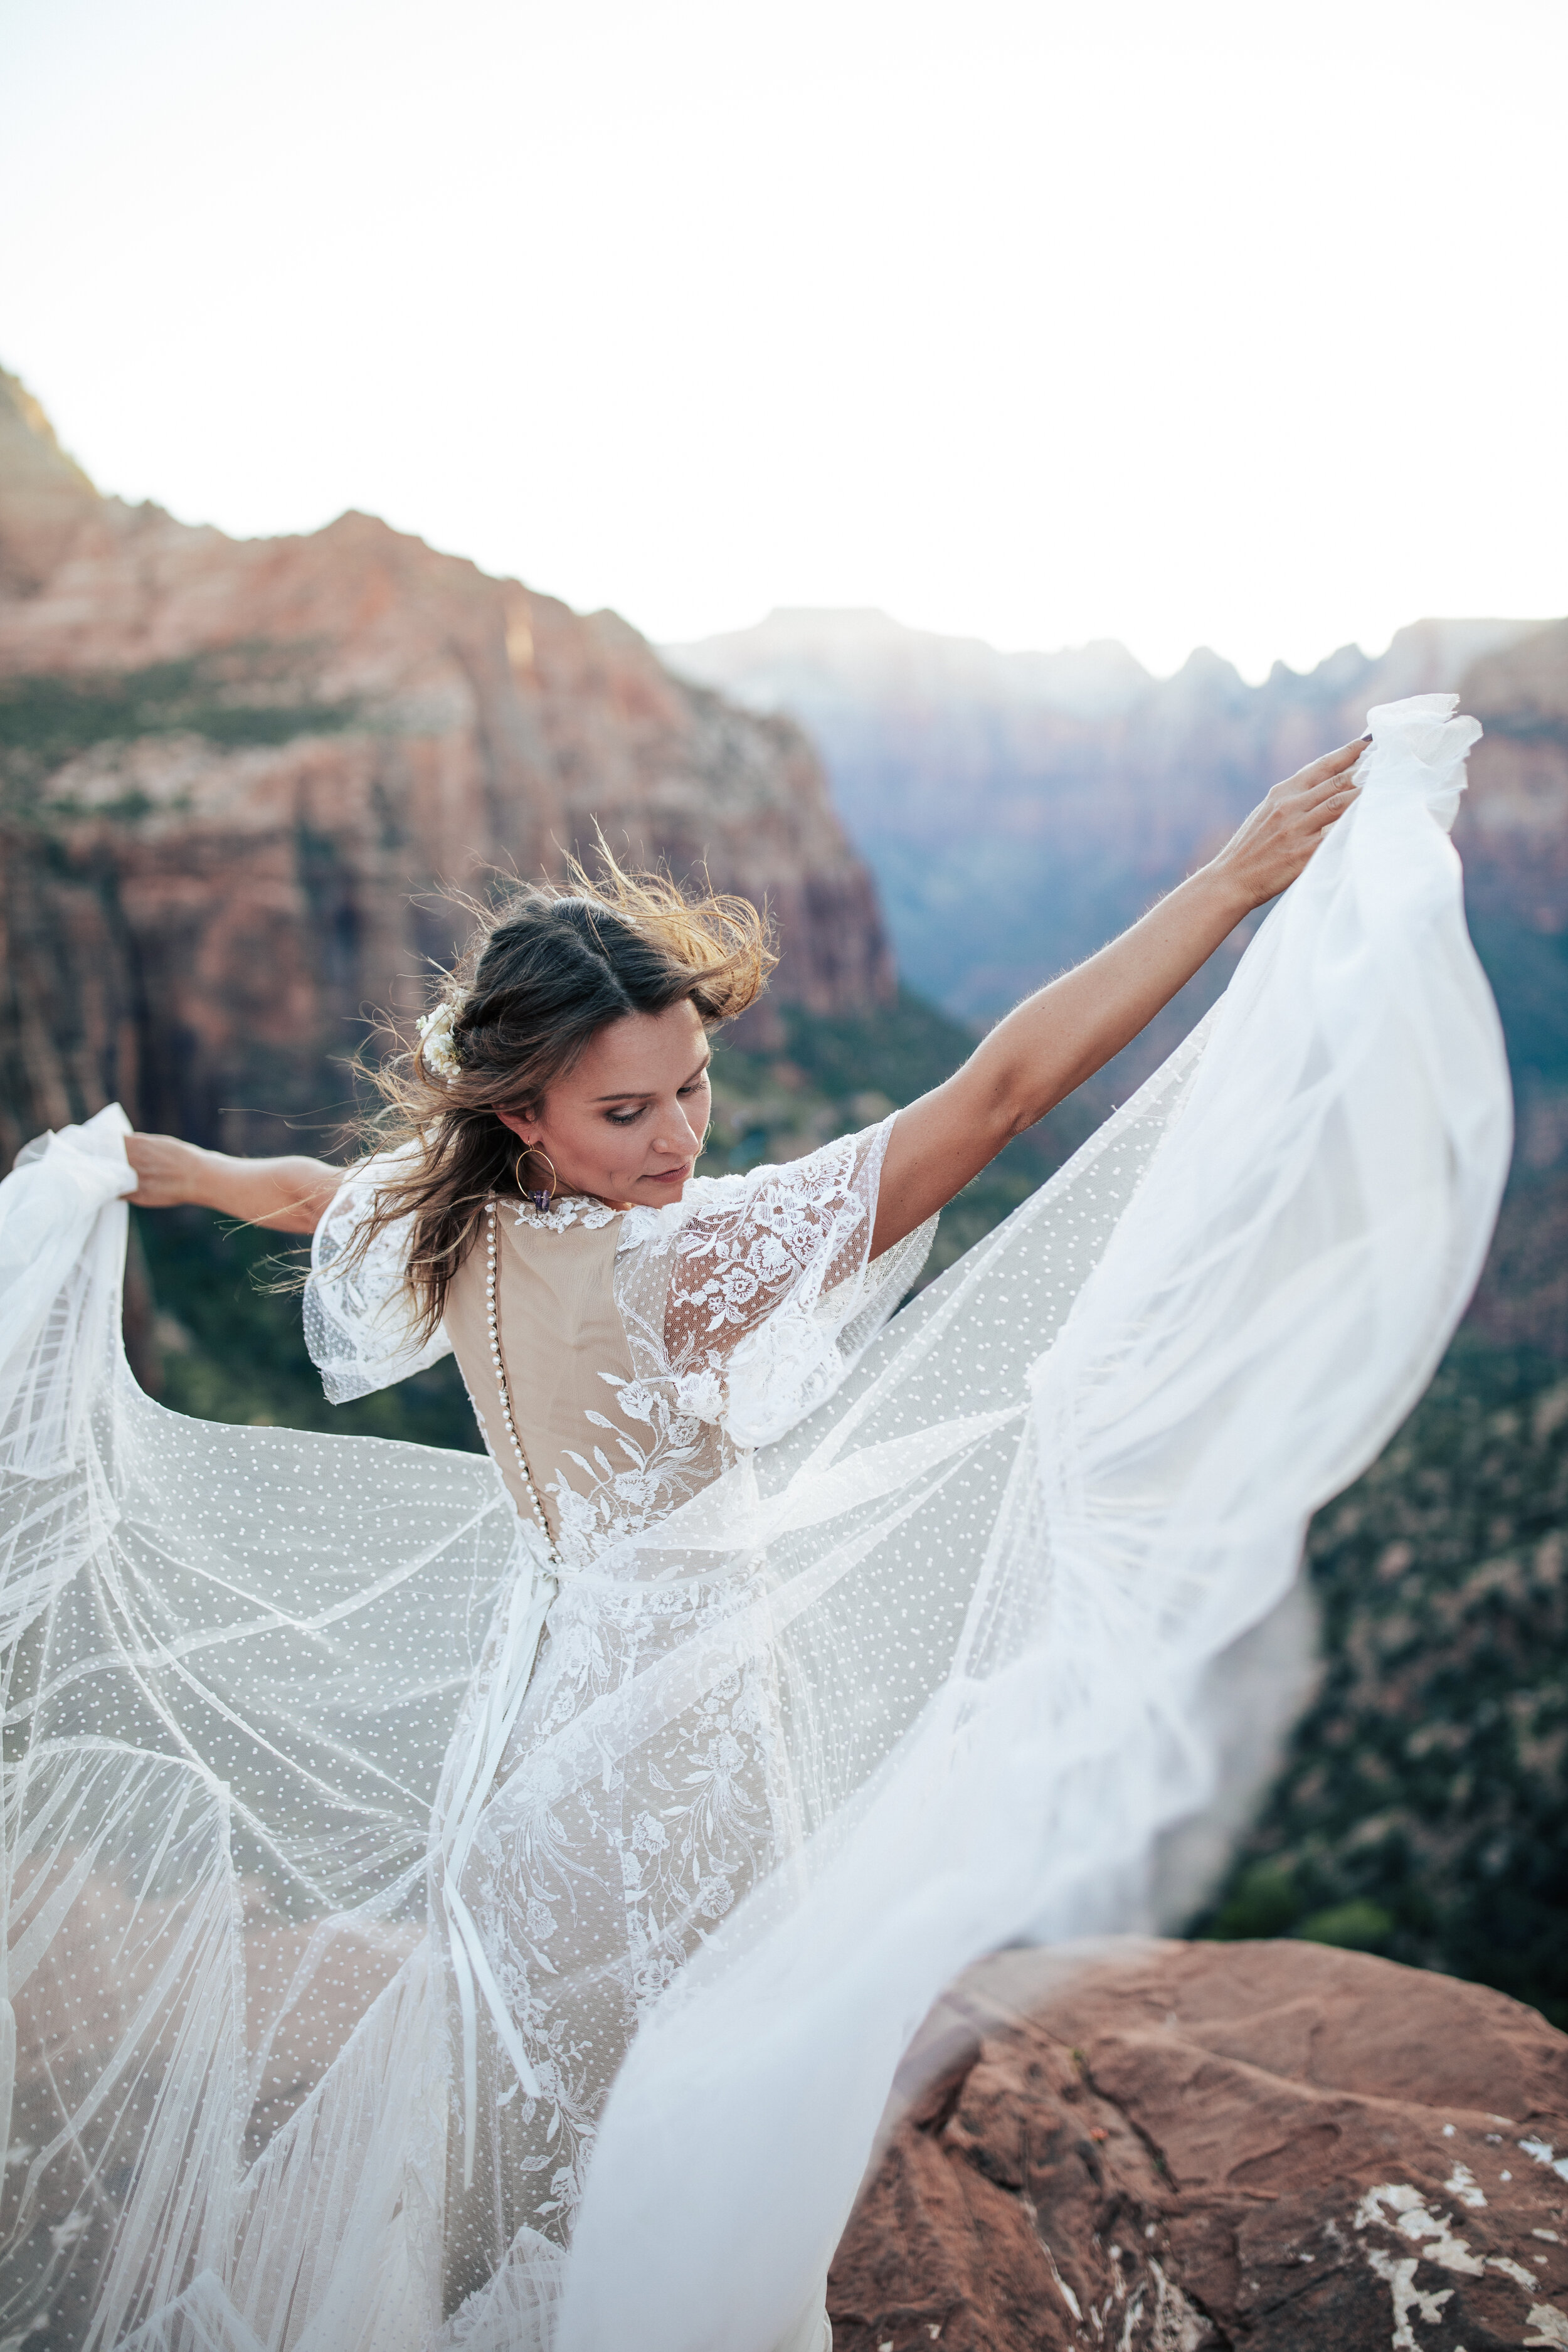  A stunning bride dances on the cliffs in Zion National Park in a unique elopement styled photo shoot by Emily Jenkins Photography. Bridal aesthetic goals unique lace wedding dress inspiration ideas and goals bridal pose inspiration ideas and goals o